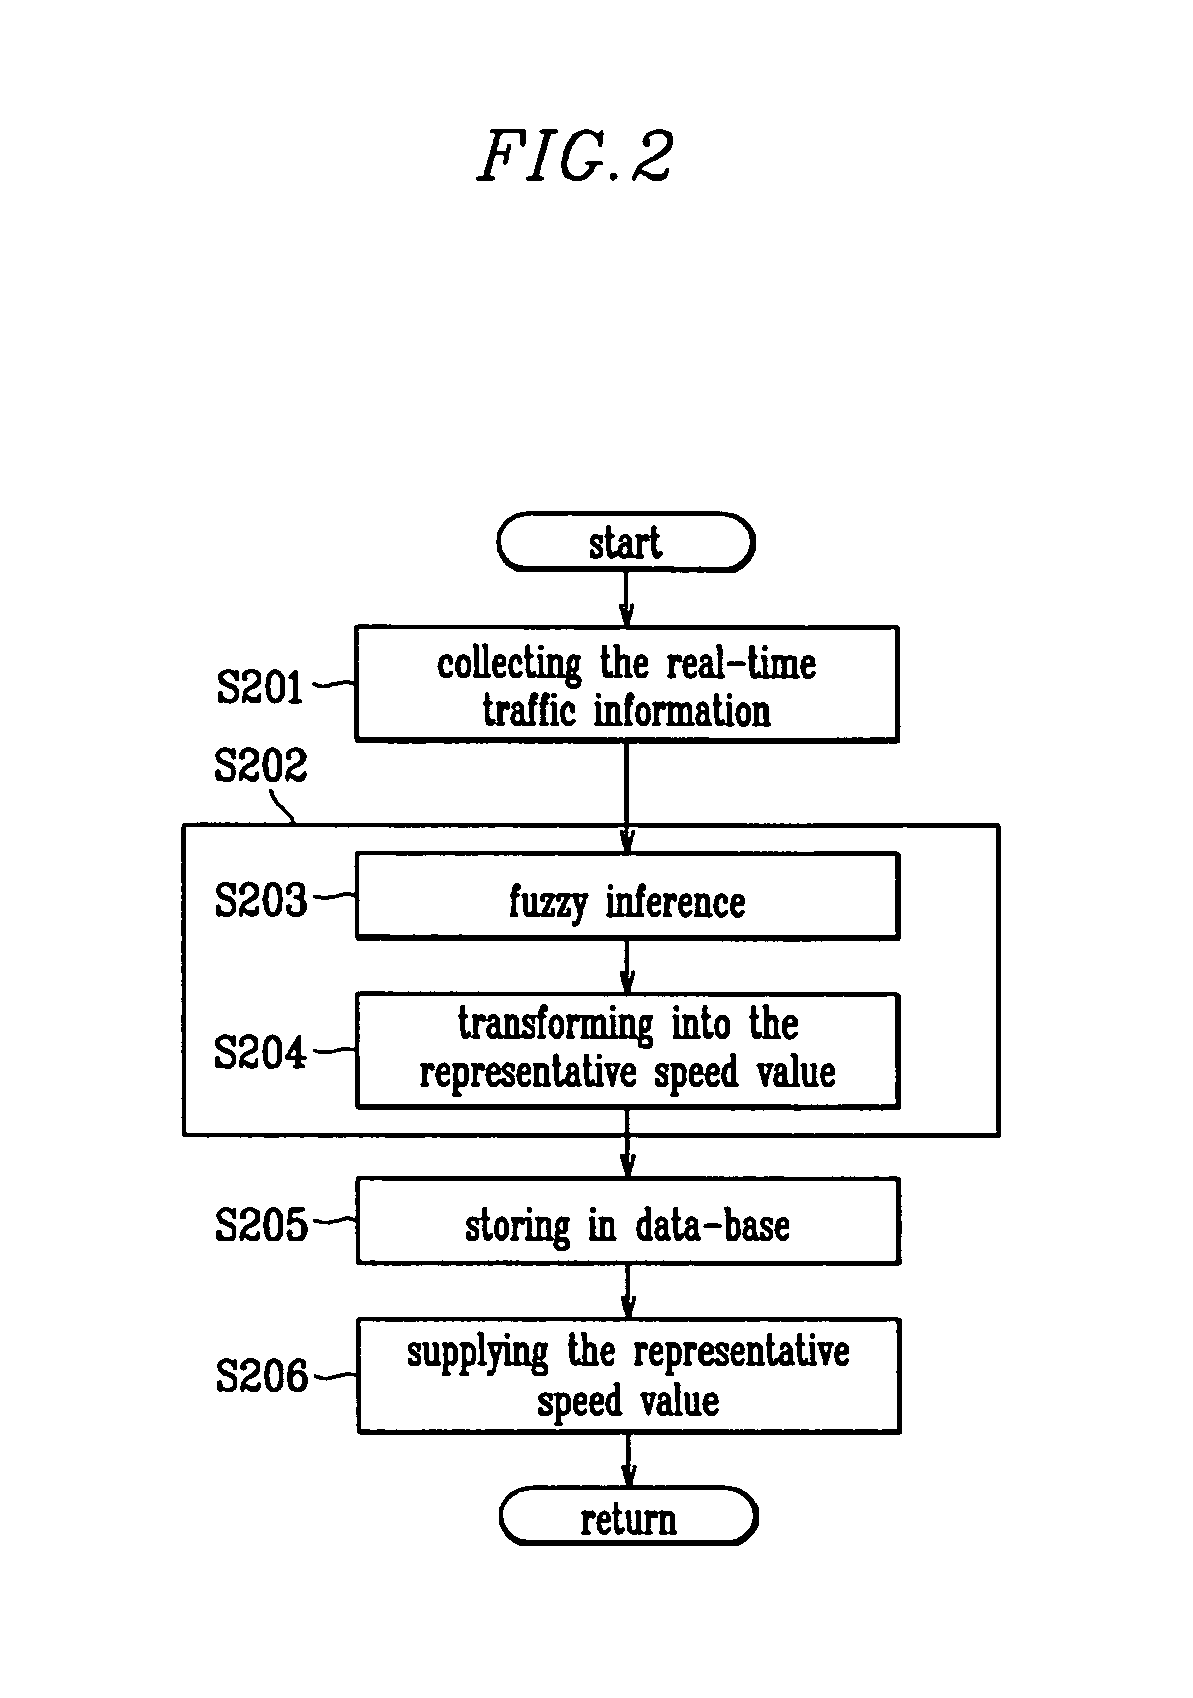 Method for determining traffic conditions